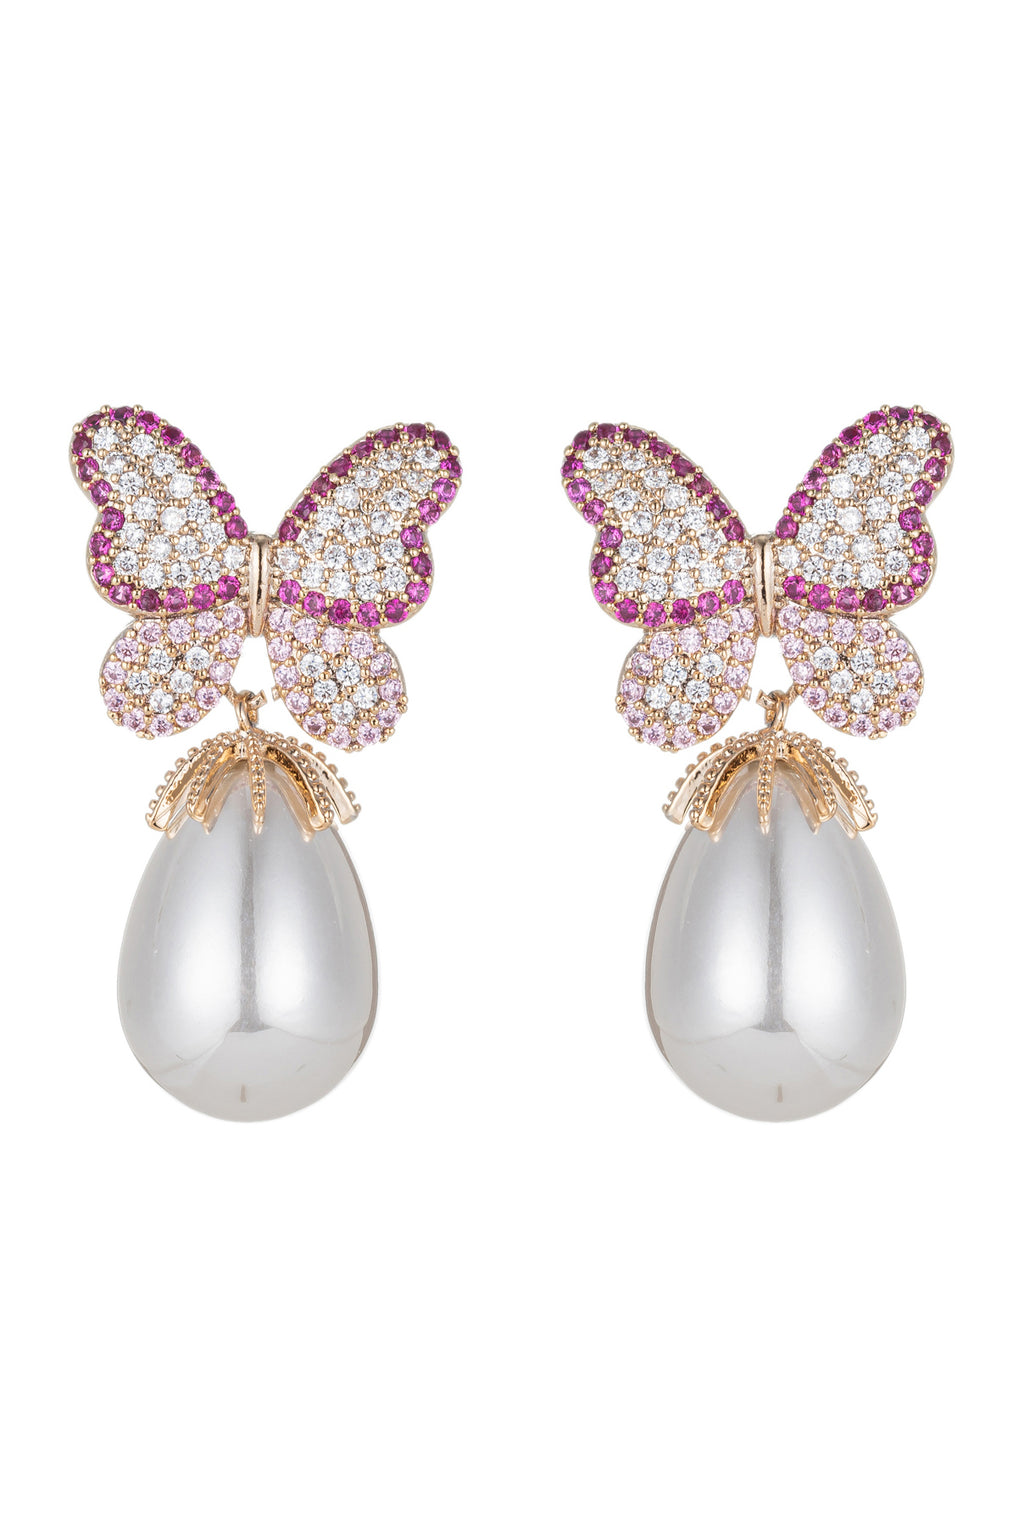 Pink butterfly wing glass pearl earrings with CZ crystals.